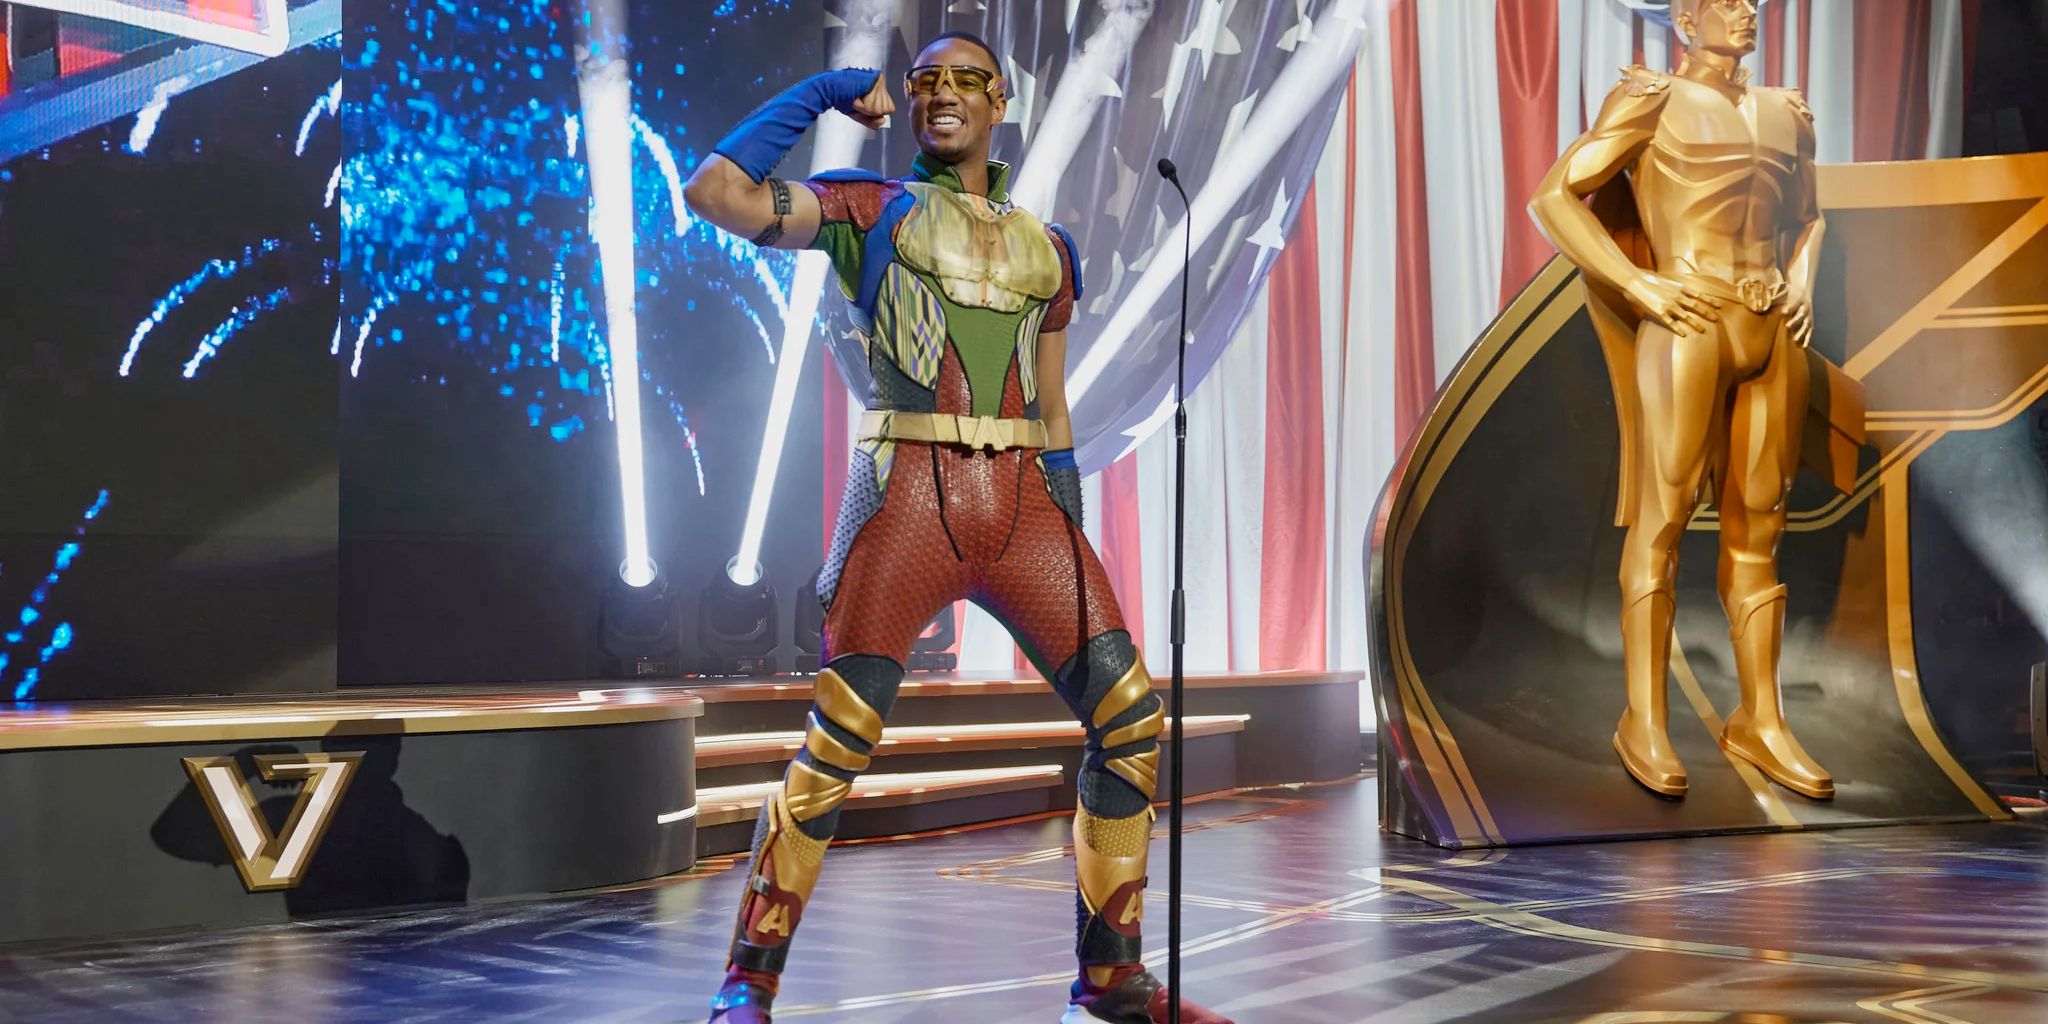 A-Train performing on stage in The Boys Season 3, Episode 2, 